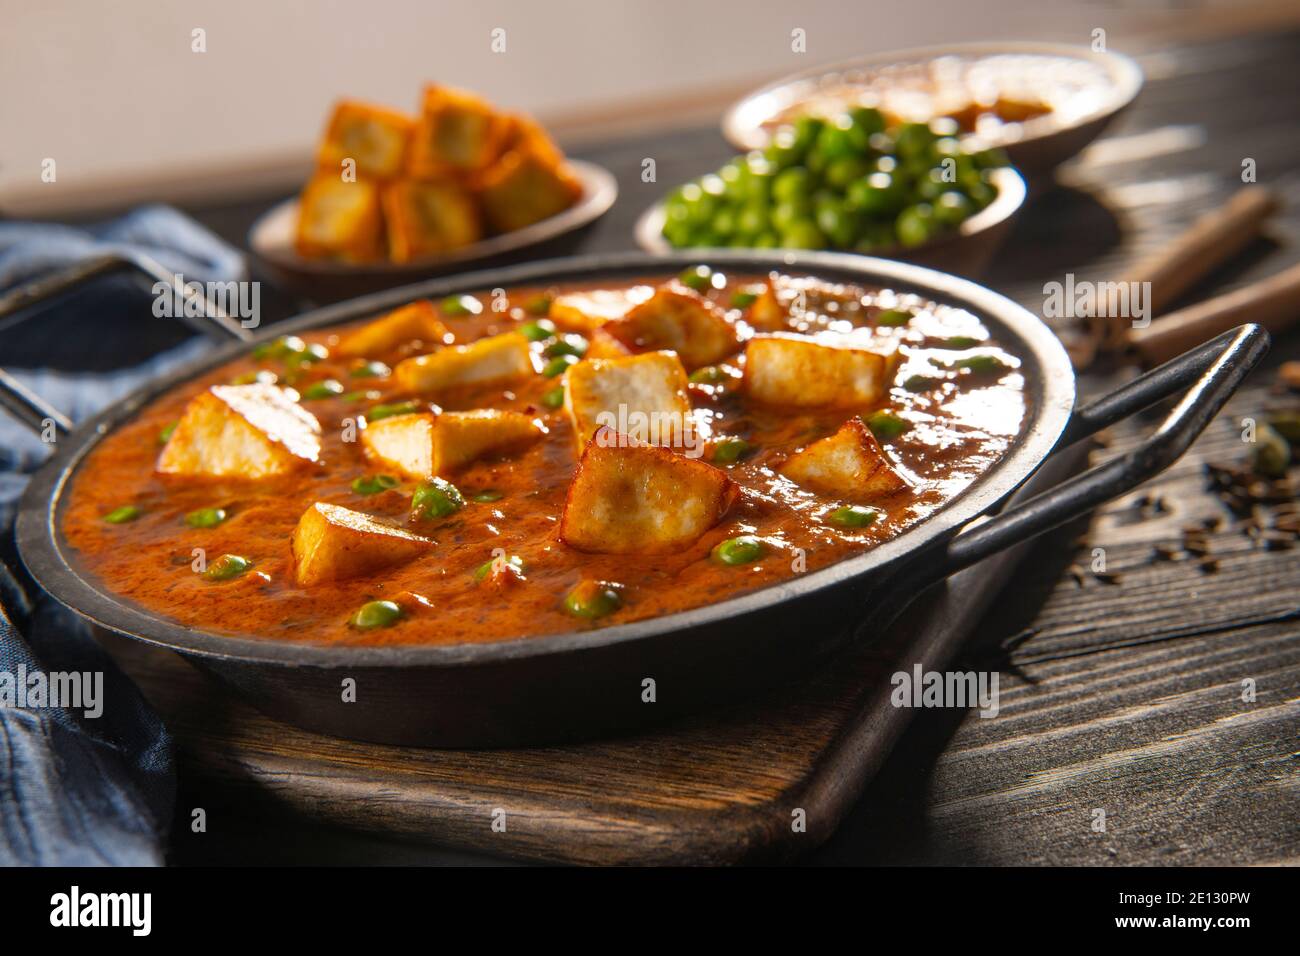 Mattar Paneer or cottage cheese with Peas. A vegetarian Indian delicacy, with raw peas and fried paneer (cottage cheese) in the background. Stock Photo